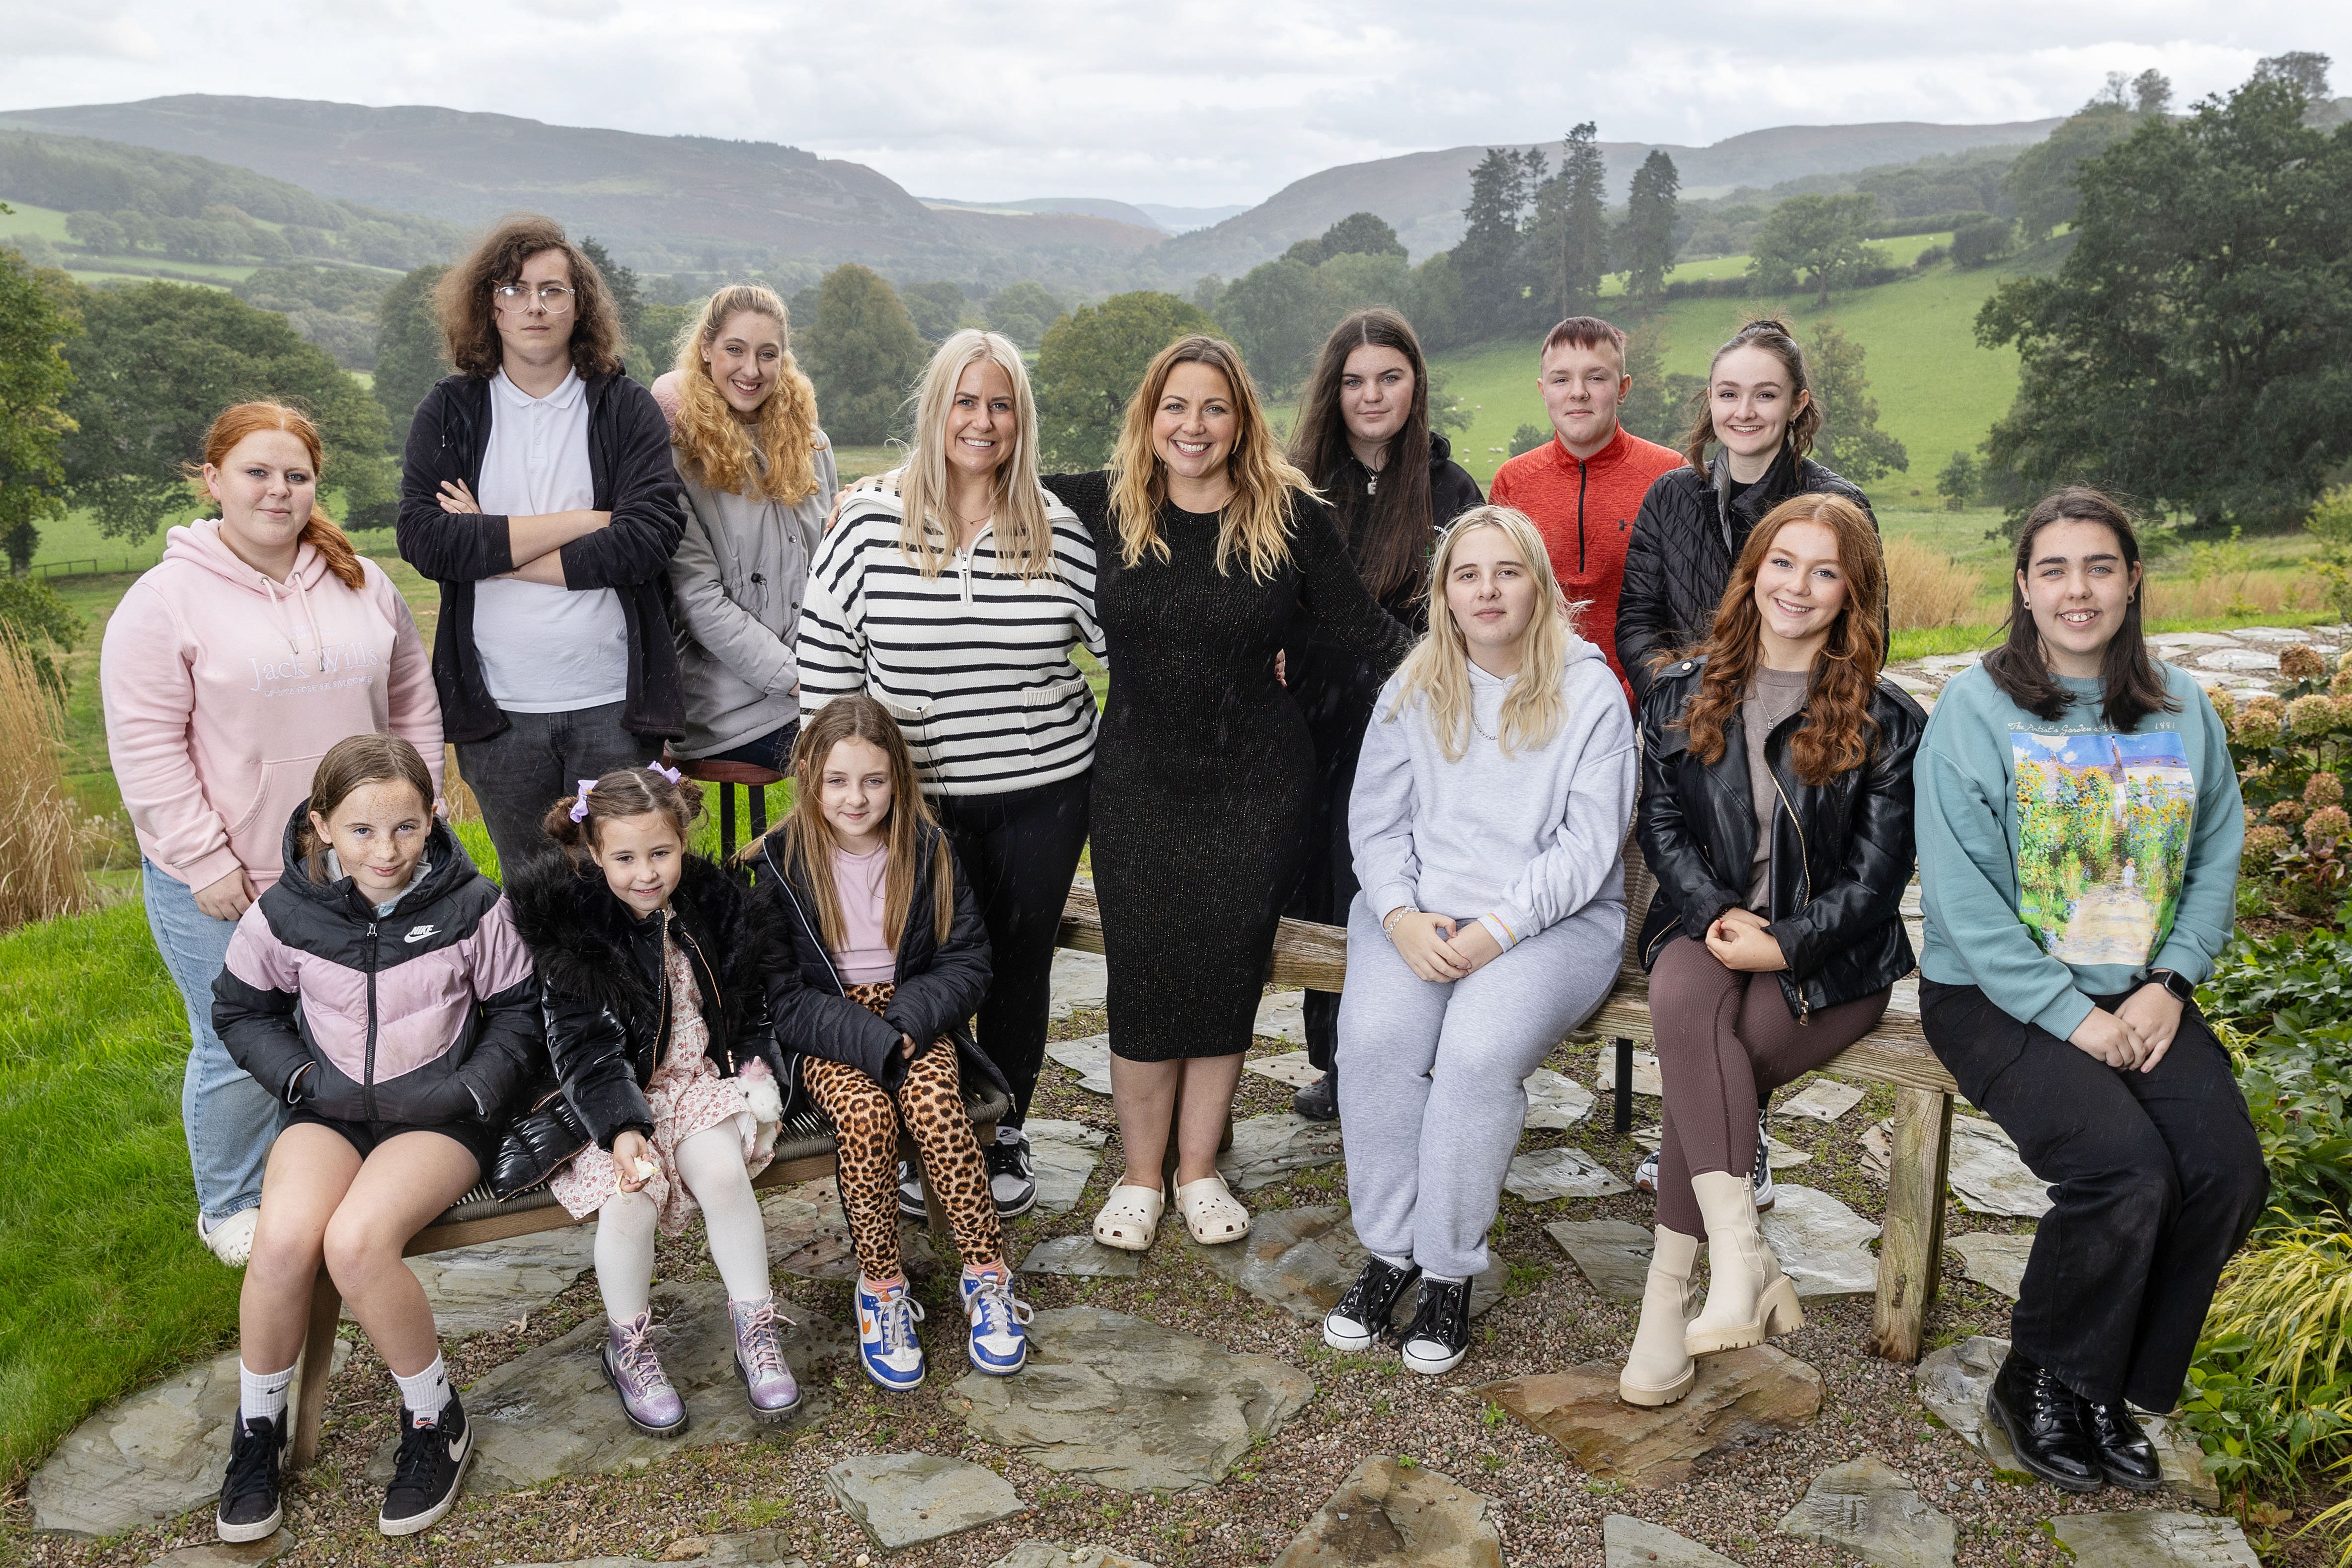 pa ready, charlotte church, action for children, wales, harper, cardiff, action, charlotte, london, battersea arts centre, charlotte church surprises young carers’ choir as new coach before gala event